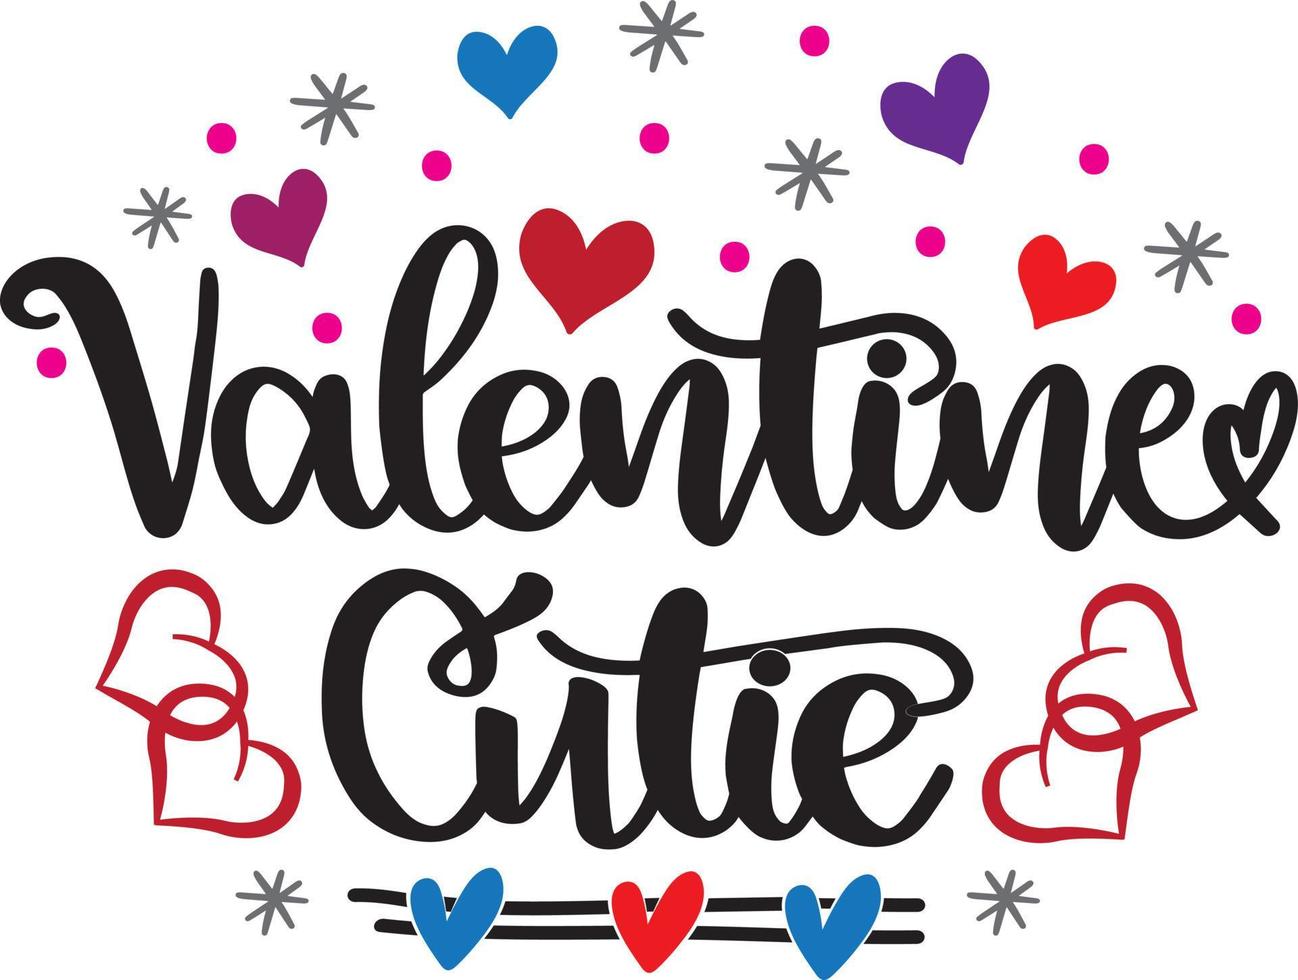 Valentine Cutie, Valentines Day, Heart, Love, Be Mine, Holiday, Vector Illustration File